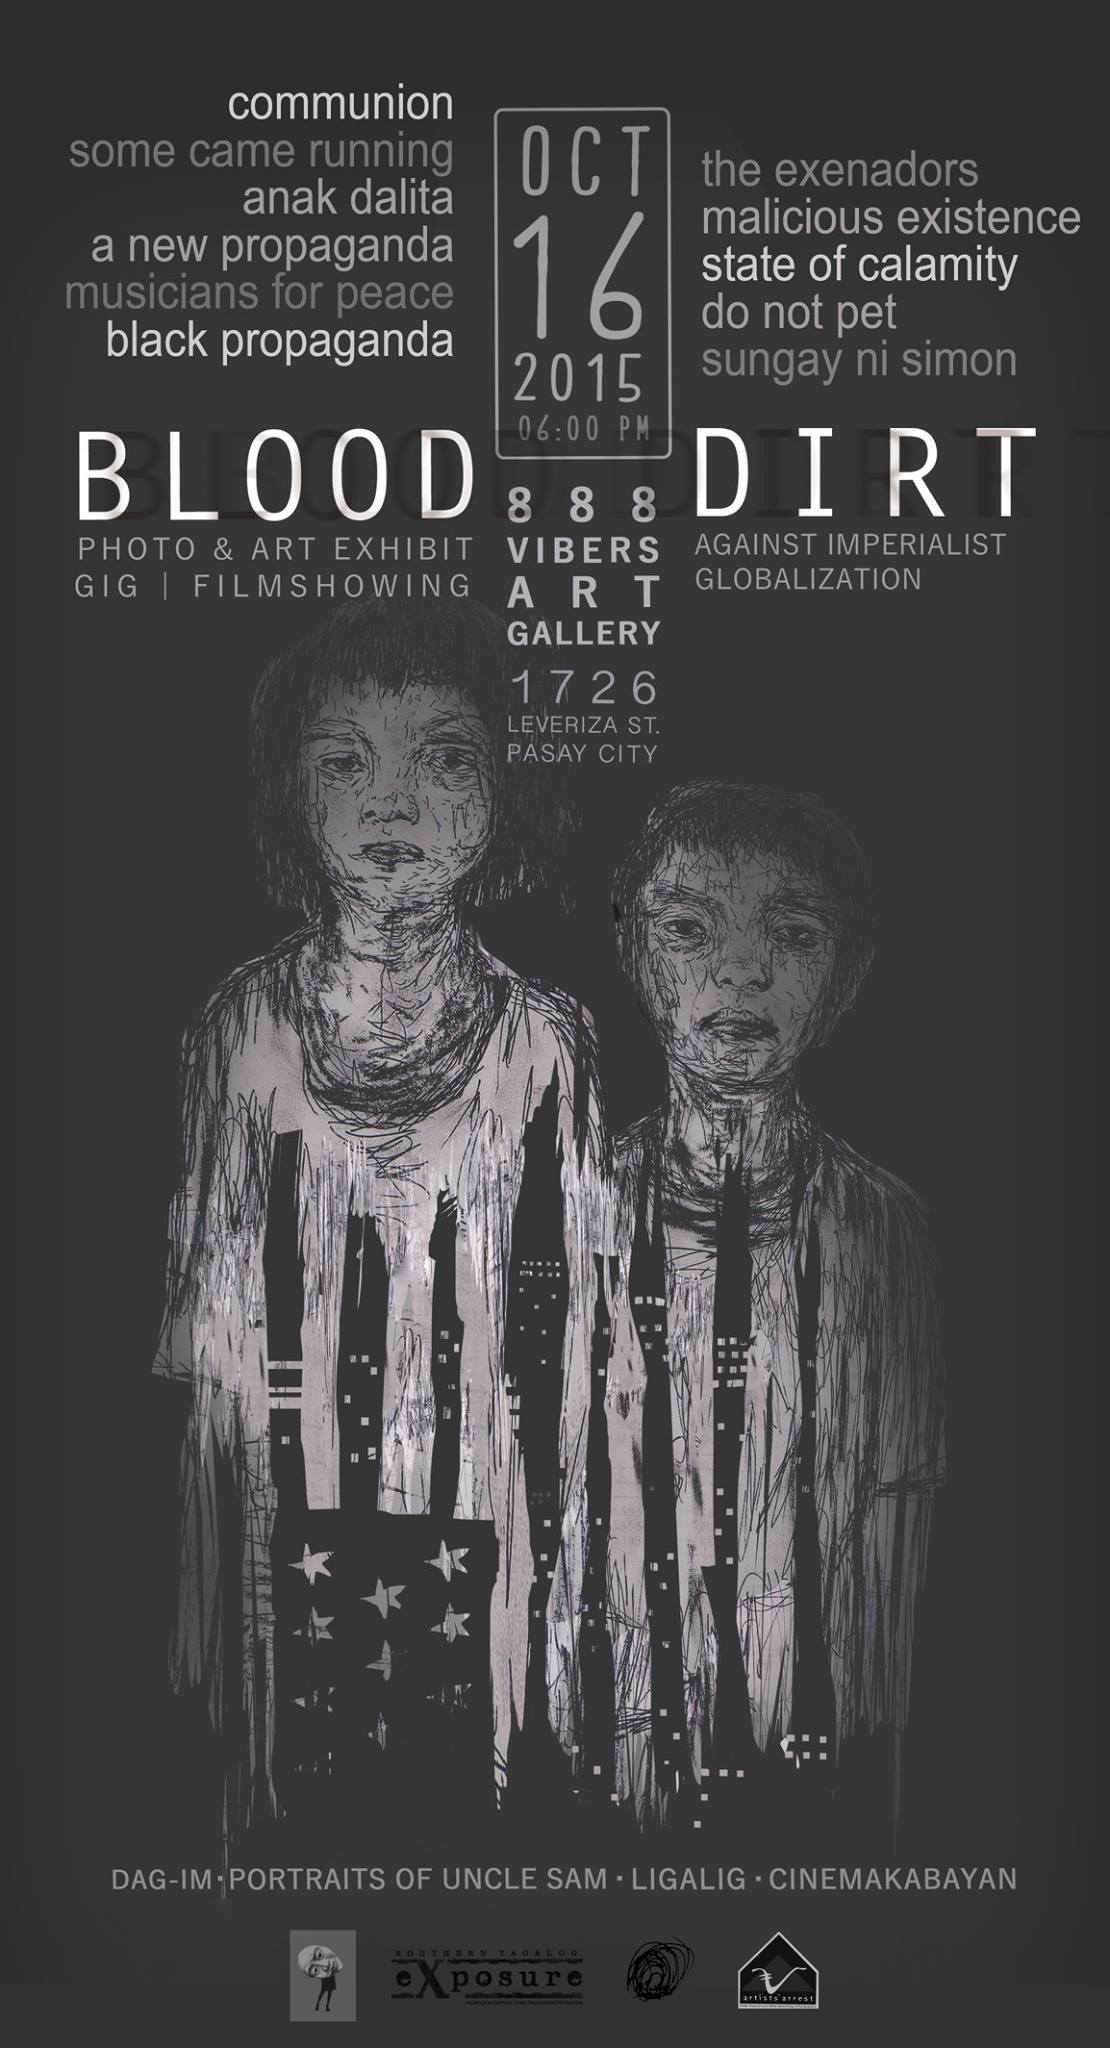 BLOOD and DIRT: Five Art Projects Against Imperialist Globalization Friday, October 16 at 6:00pm 2 days from now · 89°F / 77°F Mostly Cloudy Show Map 888 Vibers Bar & Resto Leveriza Street, Pasay City, Philippines Organized by: Southern Tagalog Exposure, Guni Guri Collective, Ugatlahi Artistcollective and Artists Arrest BLOOD AND DIRT Five Art Projects Against Imperialist Globalization Europe! Beautiful! And the birth of machines helped capitalism perfect itself. What is intended to help humanity served profit instead. And the perfection of capitalism lead to big corporations reigning supreme in the free market. But such perfection seems not so perfect at all, as the rise and fall of industrialized economies leave painful scars, and it hurts more in every fall because it is in fact deeper than the previous one, and gets deeper every time it comes again. And the shamans are summoned to the halls of the new corporate kings, to preach at the new pulpits of modern economy, to concoct by whatever magic some form of cure. But alas! Their magic falls short. No one buys the formulations nor the hint of an apologia of their moribund system. America! Make way! And the answer was pointed overseas, as did the conquistadors of antiquity. Under dollar and bayonet, establish neo-colonies in foreign shores and make them carry the yoke of the Western crisis of capitalism. What inventive progress!! Medieval means to answer modern crises! Behold: more chilling is the obedience of the local feudal lords. And imperialism was born from capitalist failures: rotten at the core, cry of every poor child, burden and hurt of every toiling mother and father--scourge of the earth! In the age of imperialist globalization, US dominance shifts focus in the Asia Pacific. And as every puppet government complies, state fascism escalates to serve and protect foreign interests. Hence, four art groups converge in a project to expose and oppose this mod